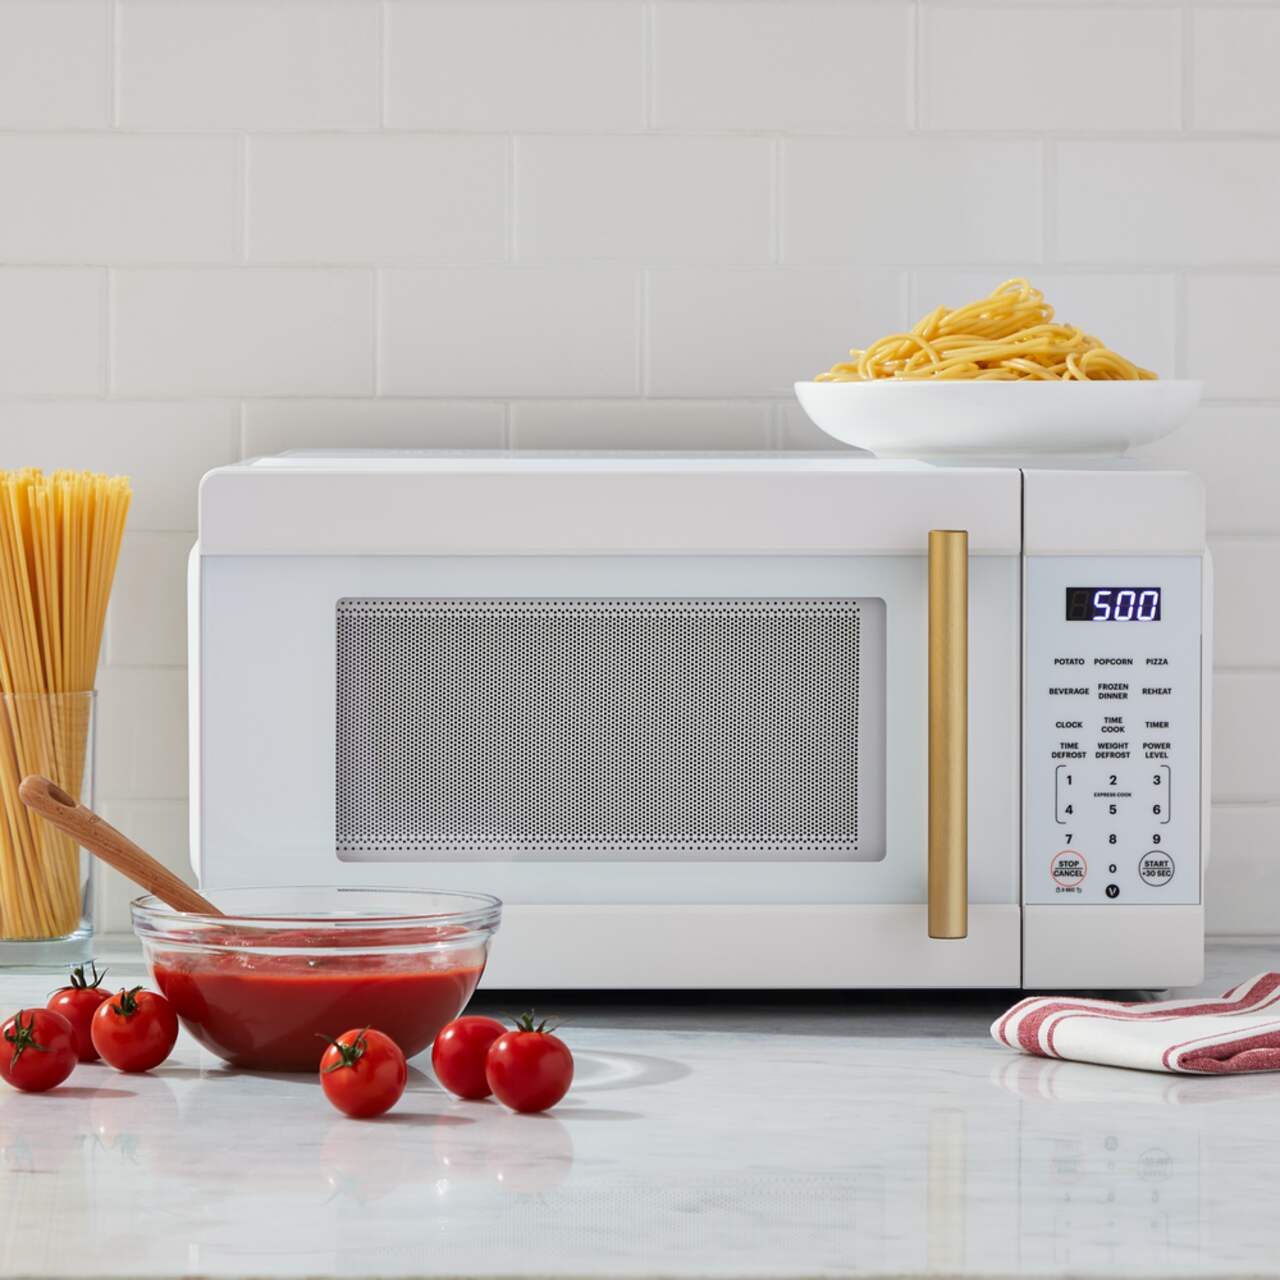 https://media-www.canadiantire.ca/product/living/kitchen/white-goods/0437017/vida-1-1-mwo-white-gold-109d5d04-1ece-44af-af36-4ebd31aa0b51.png?imdensity=1&imwidth=1244&impolicy=mZoom